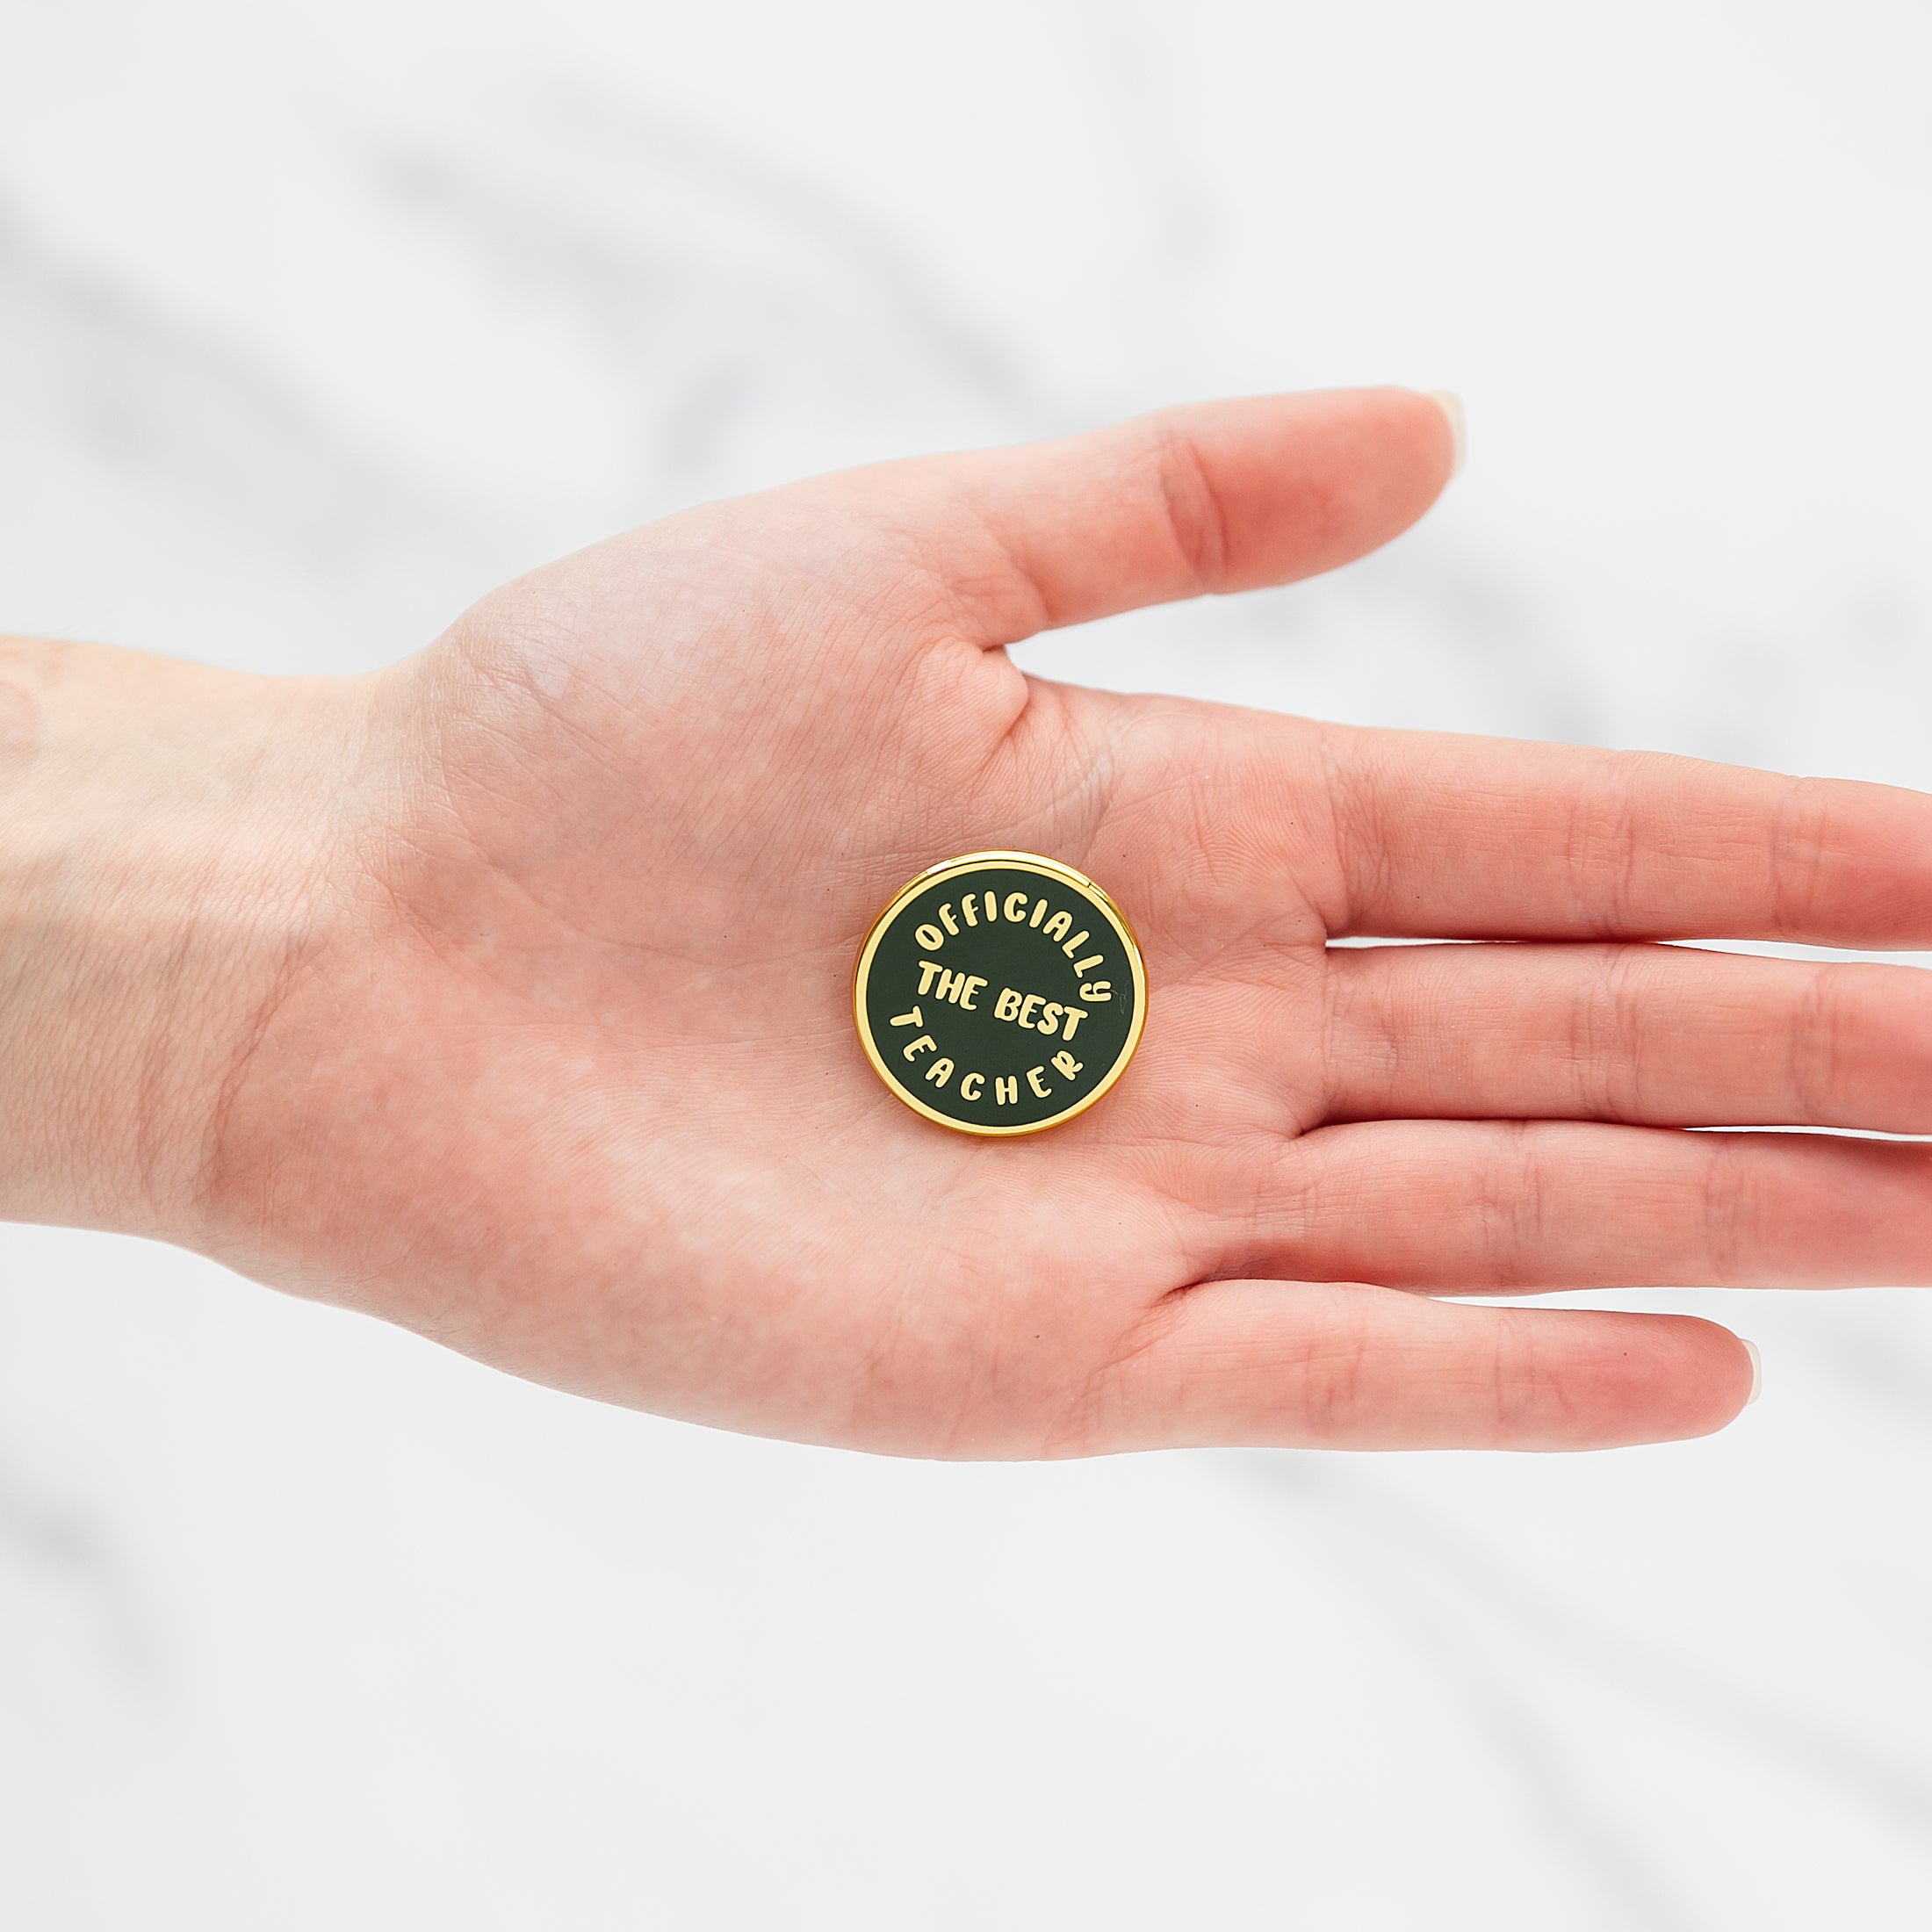 a person's hand holding a green and yellow badge